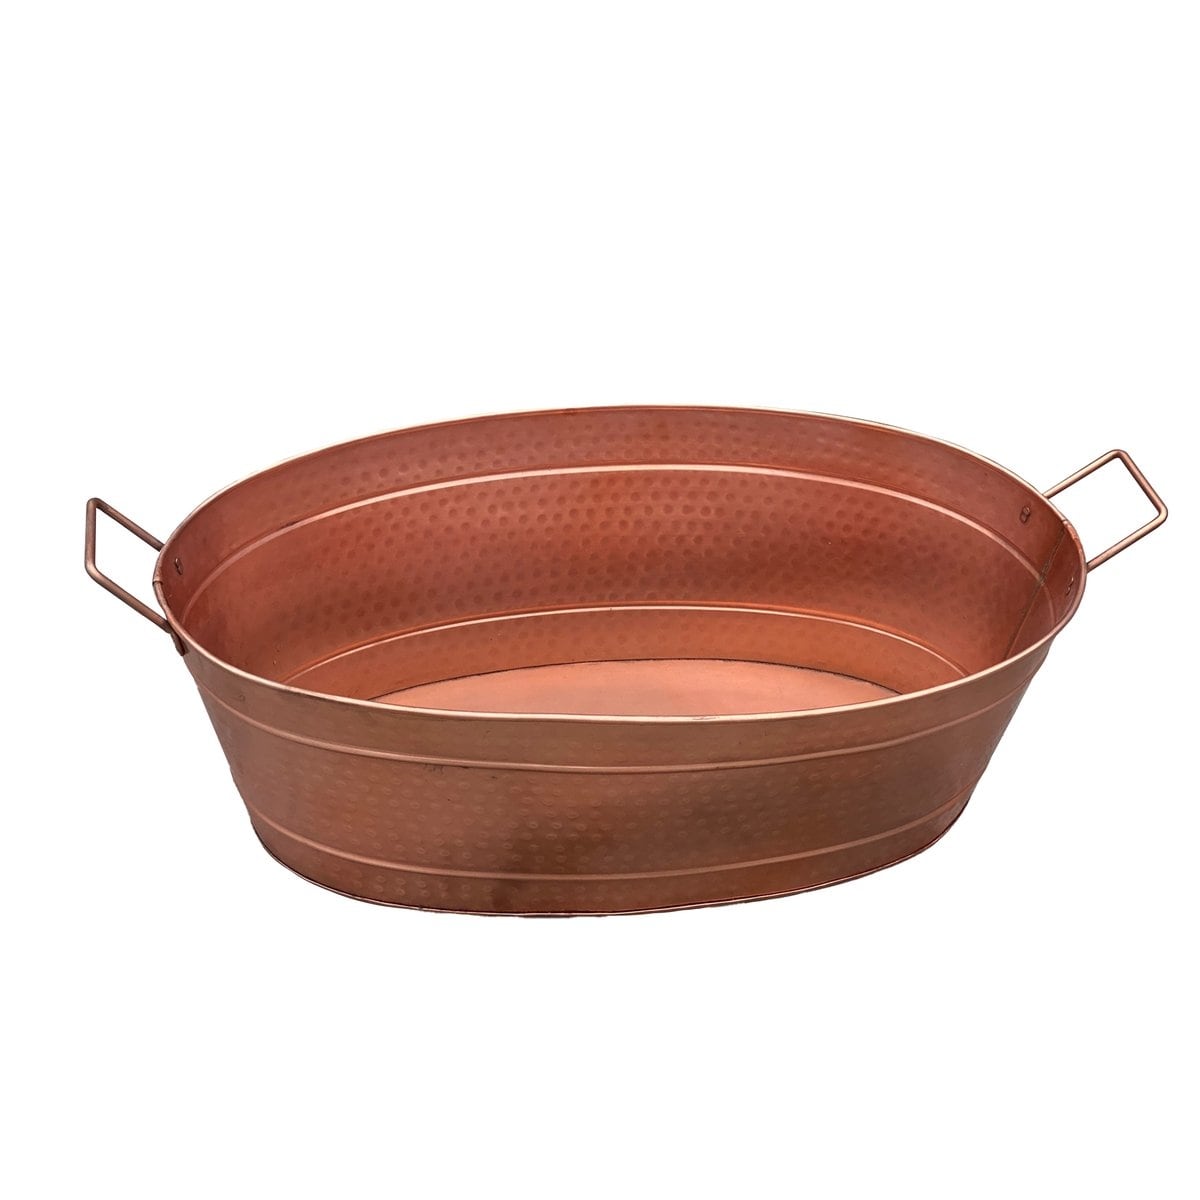 Oval Shape Hammered texture Metal Tub with 2 Side Handles, Copper - 9.5 H x 15 W x 30.5 L Inches